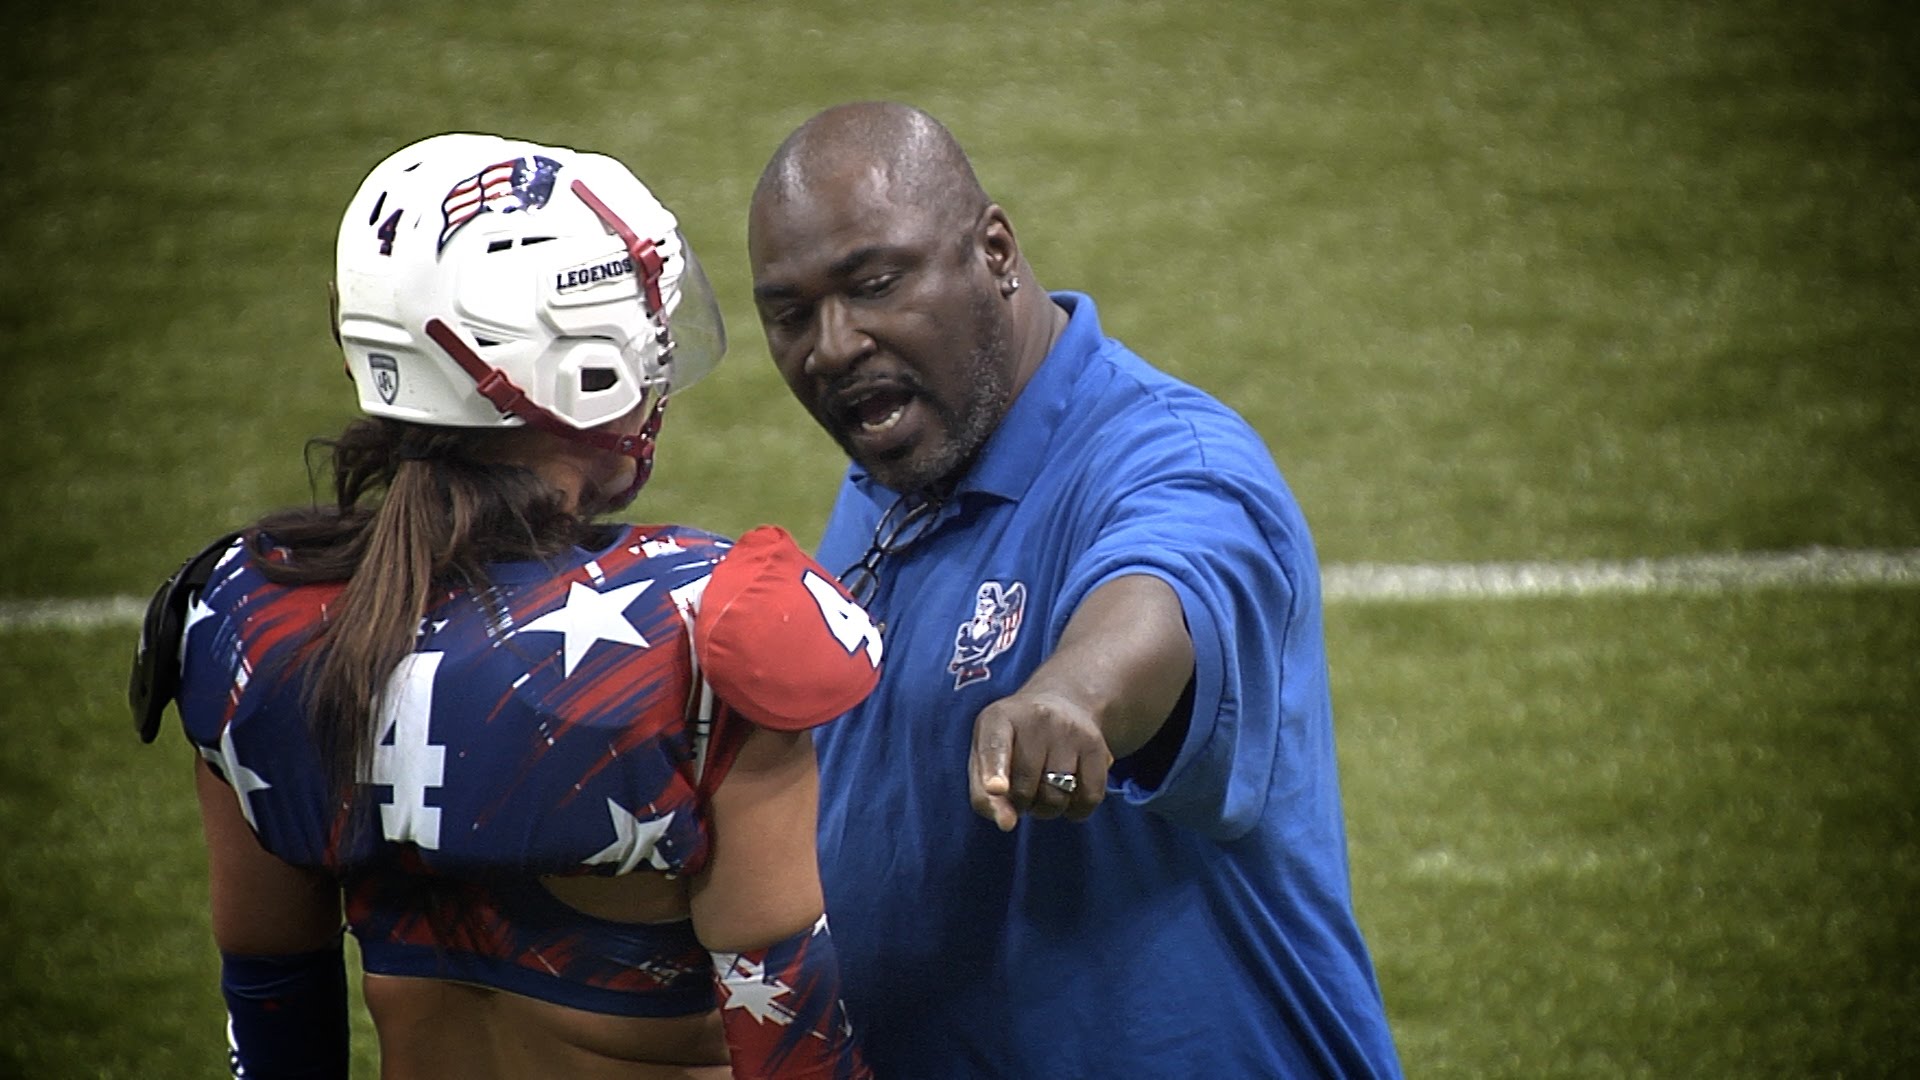 LFL Coach tells player to “Punch that Bitch in the Goddamn Face”